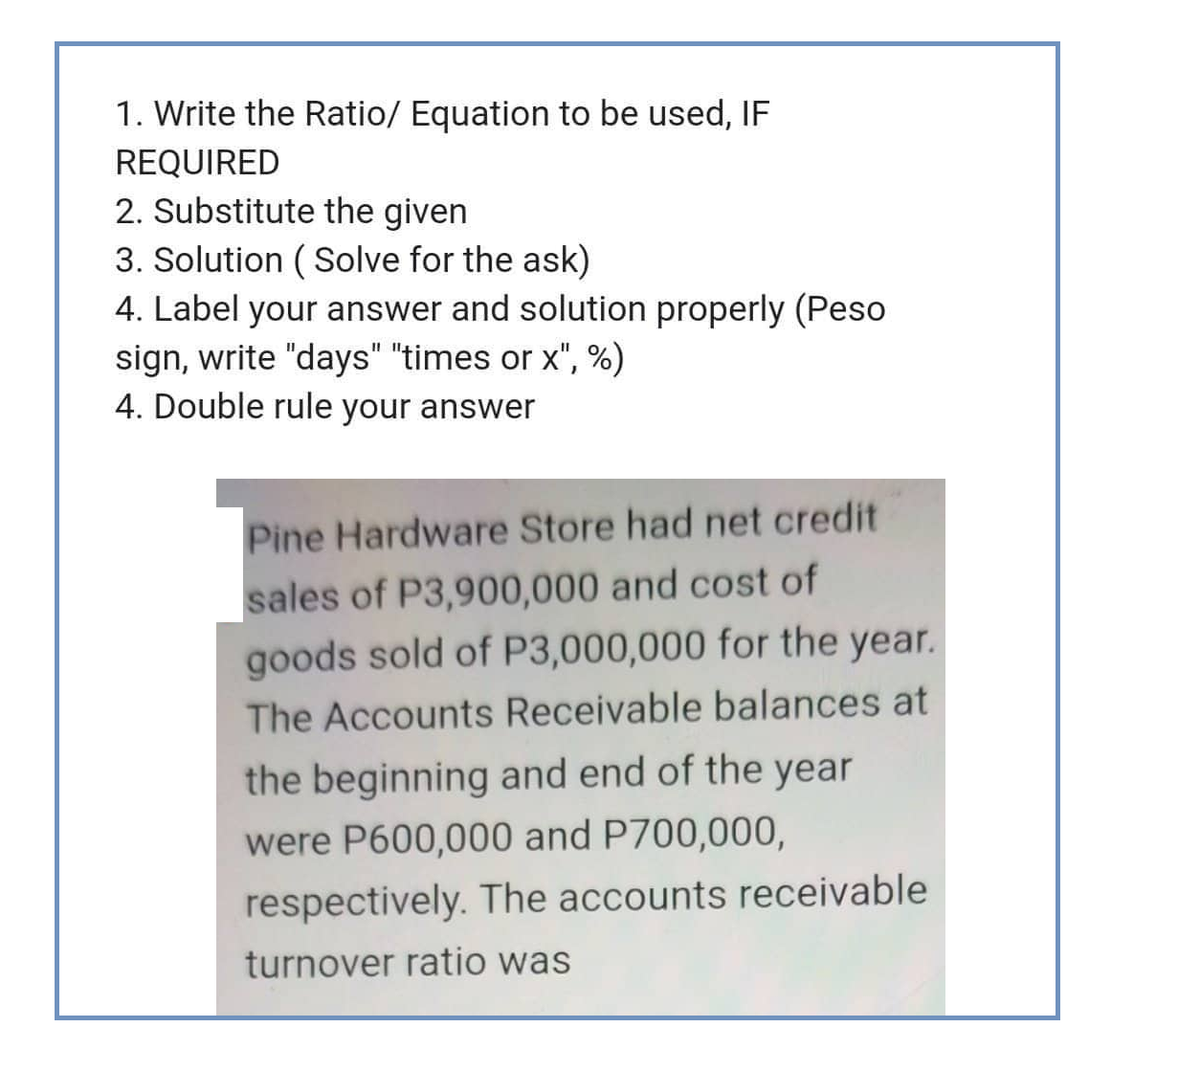 1. Write the Ratio/ Equation to be used, IF
REQUIRED
2. Substitute the given
3. Solution (Solve for the ask)
4. Label your answer and solution properly (Peso
sign, write "days" "times or x", %)
4. Double rule your answer
Pine Hardware Store had net credit
sales of P3,900,000 and cost of
goods sold of P3,000,000 for the year.
The Accounts Receivable balances at
the beginning and end of the year
were P600,000 and P700,000,
respectively. The accounts receivable
turnover ratio was